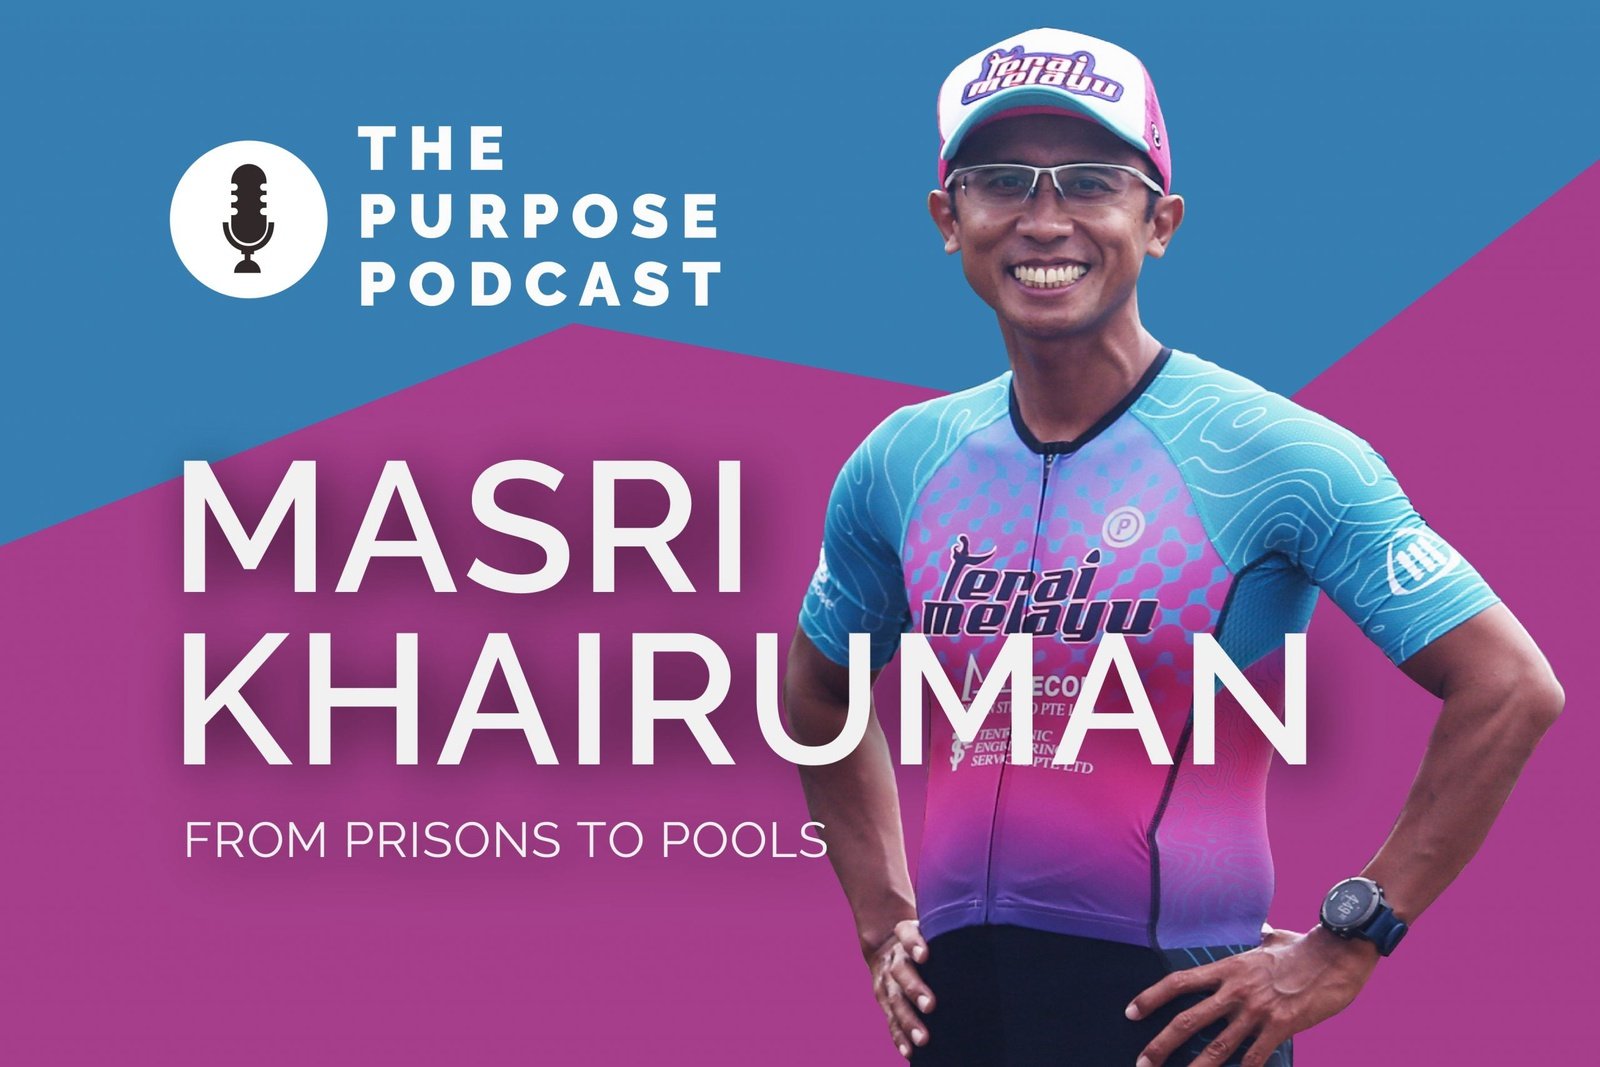 The PURPOSE Podcast: Masri Khairuman, from prisons to pools